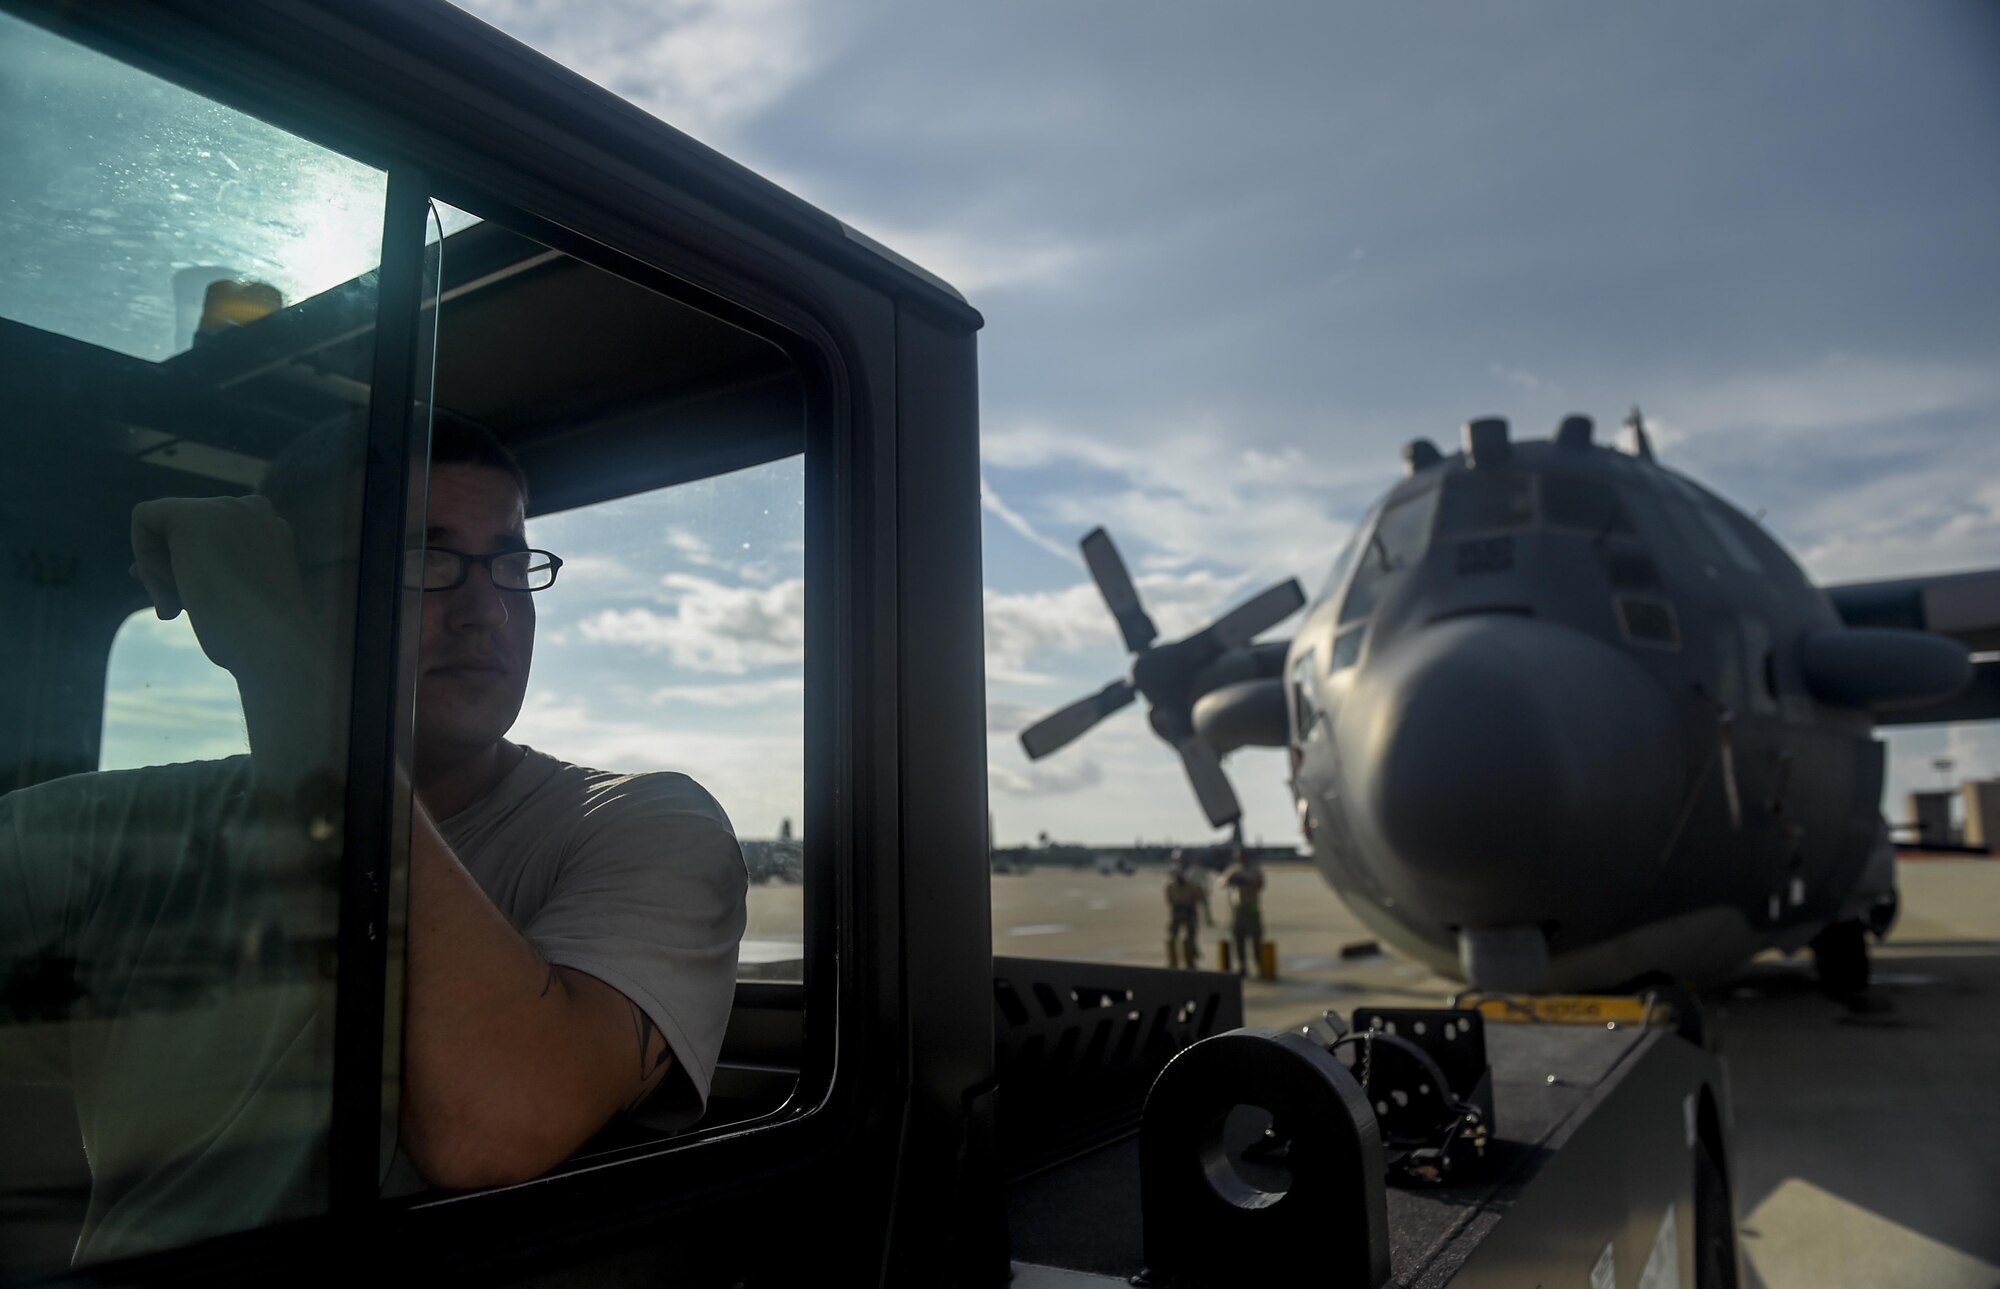 Airmen with the 1st Special Operations Aircraft Maintenance Squadron prepare to tow an AC-130H Spectre to the Air Park on Hurlburt Field, Fla., Aug. 15, 2015. The Spectre was towed from the flightline and staged for installation in the Hurlburt Field Air Park. The AC-130H fleet retired May 26, 2015, after more than 45 years of service. The installation process for this aircraft, known as “Wicked Wanda,” is set to be complete by Aug. 28, 2015. (U.S. Air Force photo by Airman Kai White/Released)